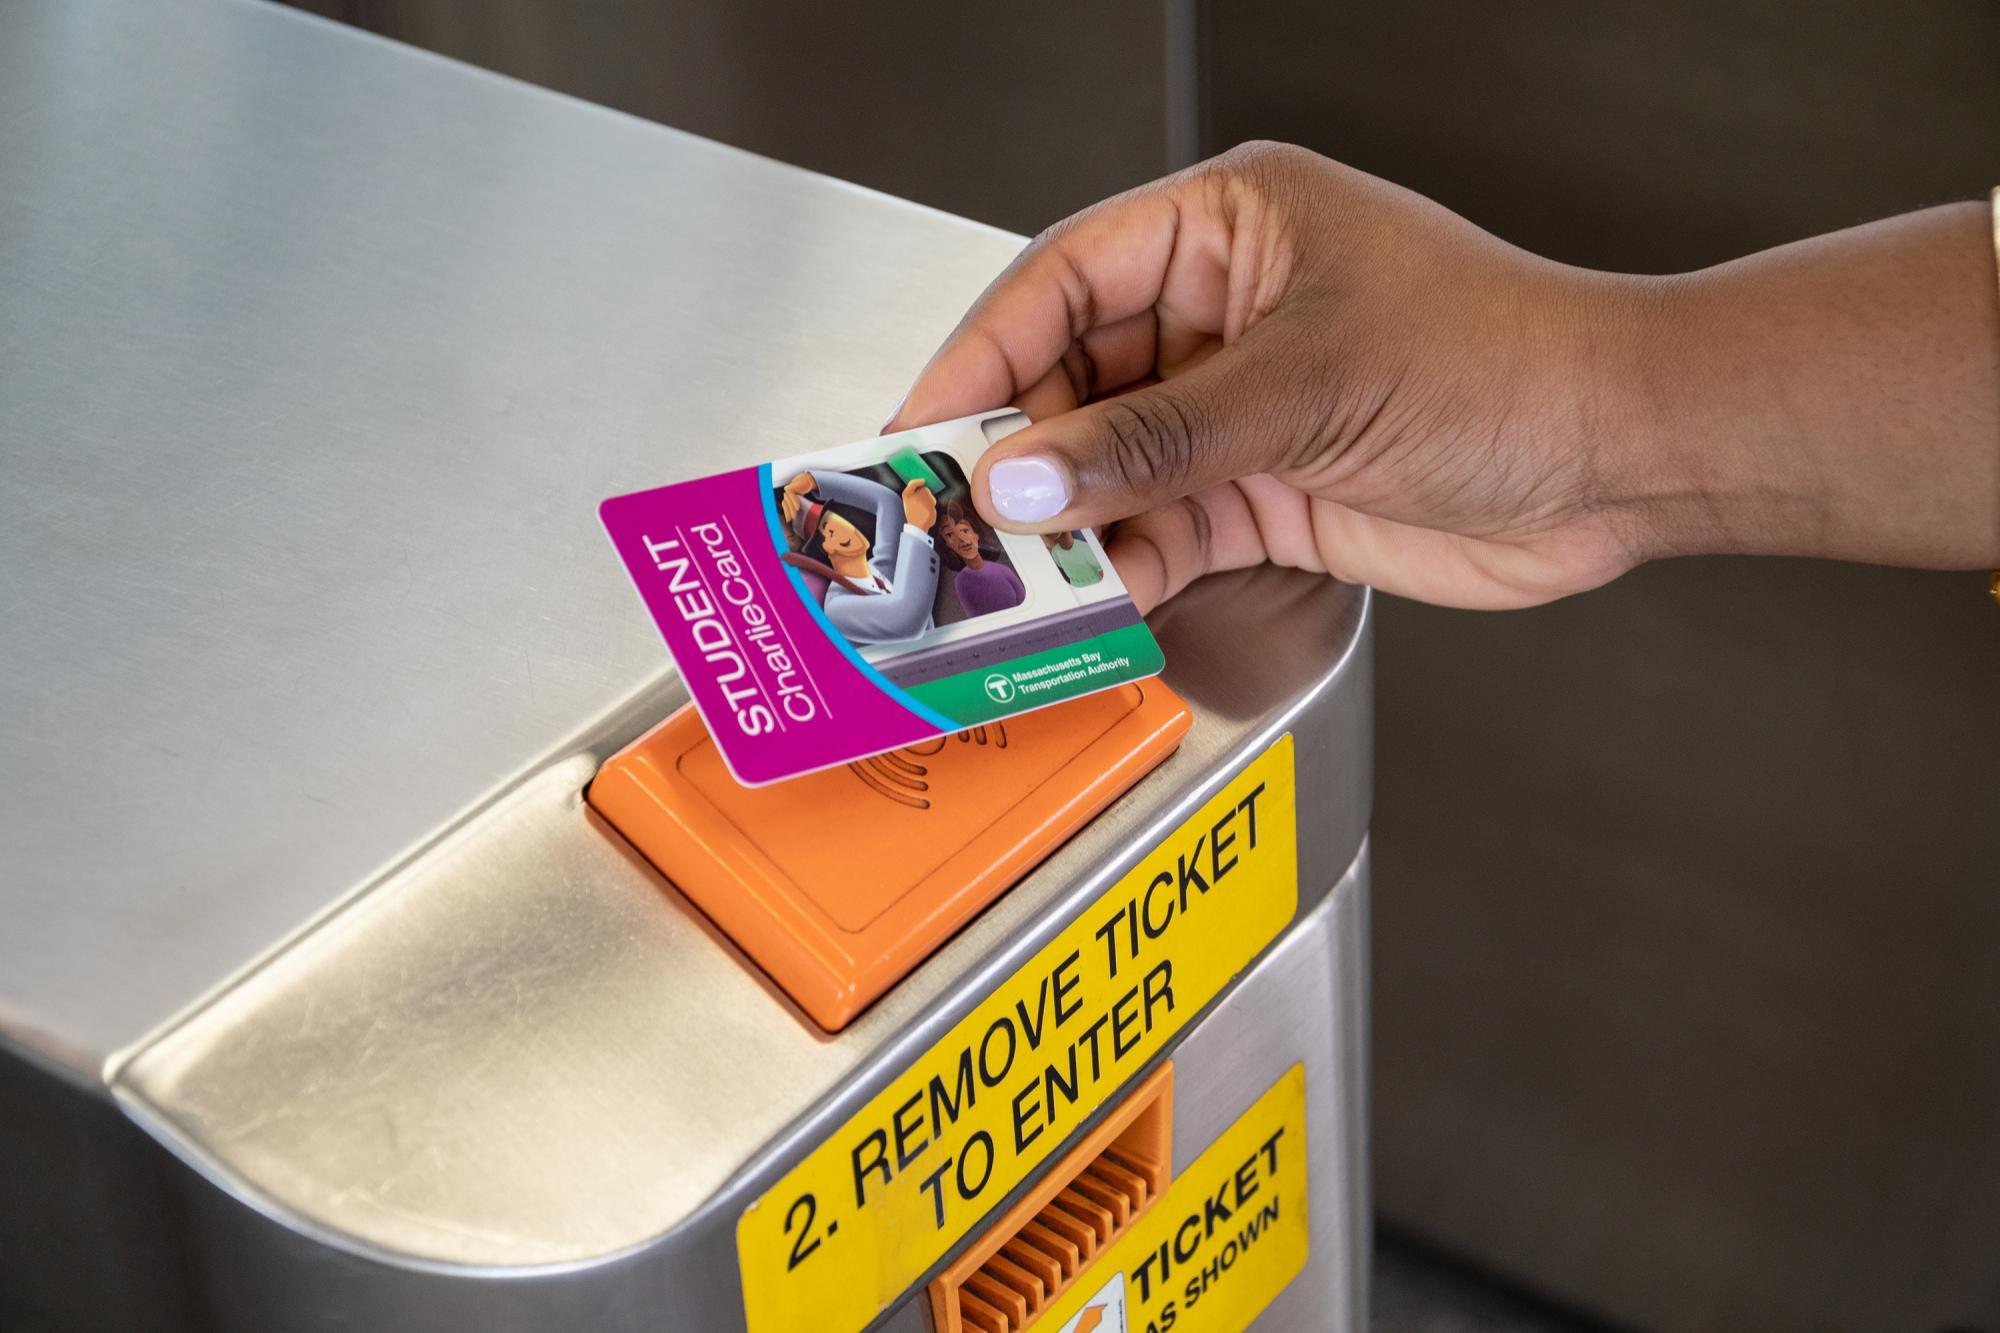 Tapping a purple M7 Student CharlieCard on a subway fare gate